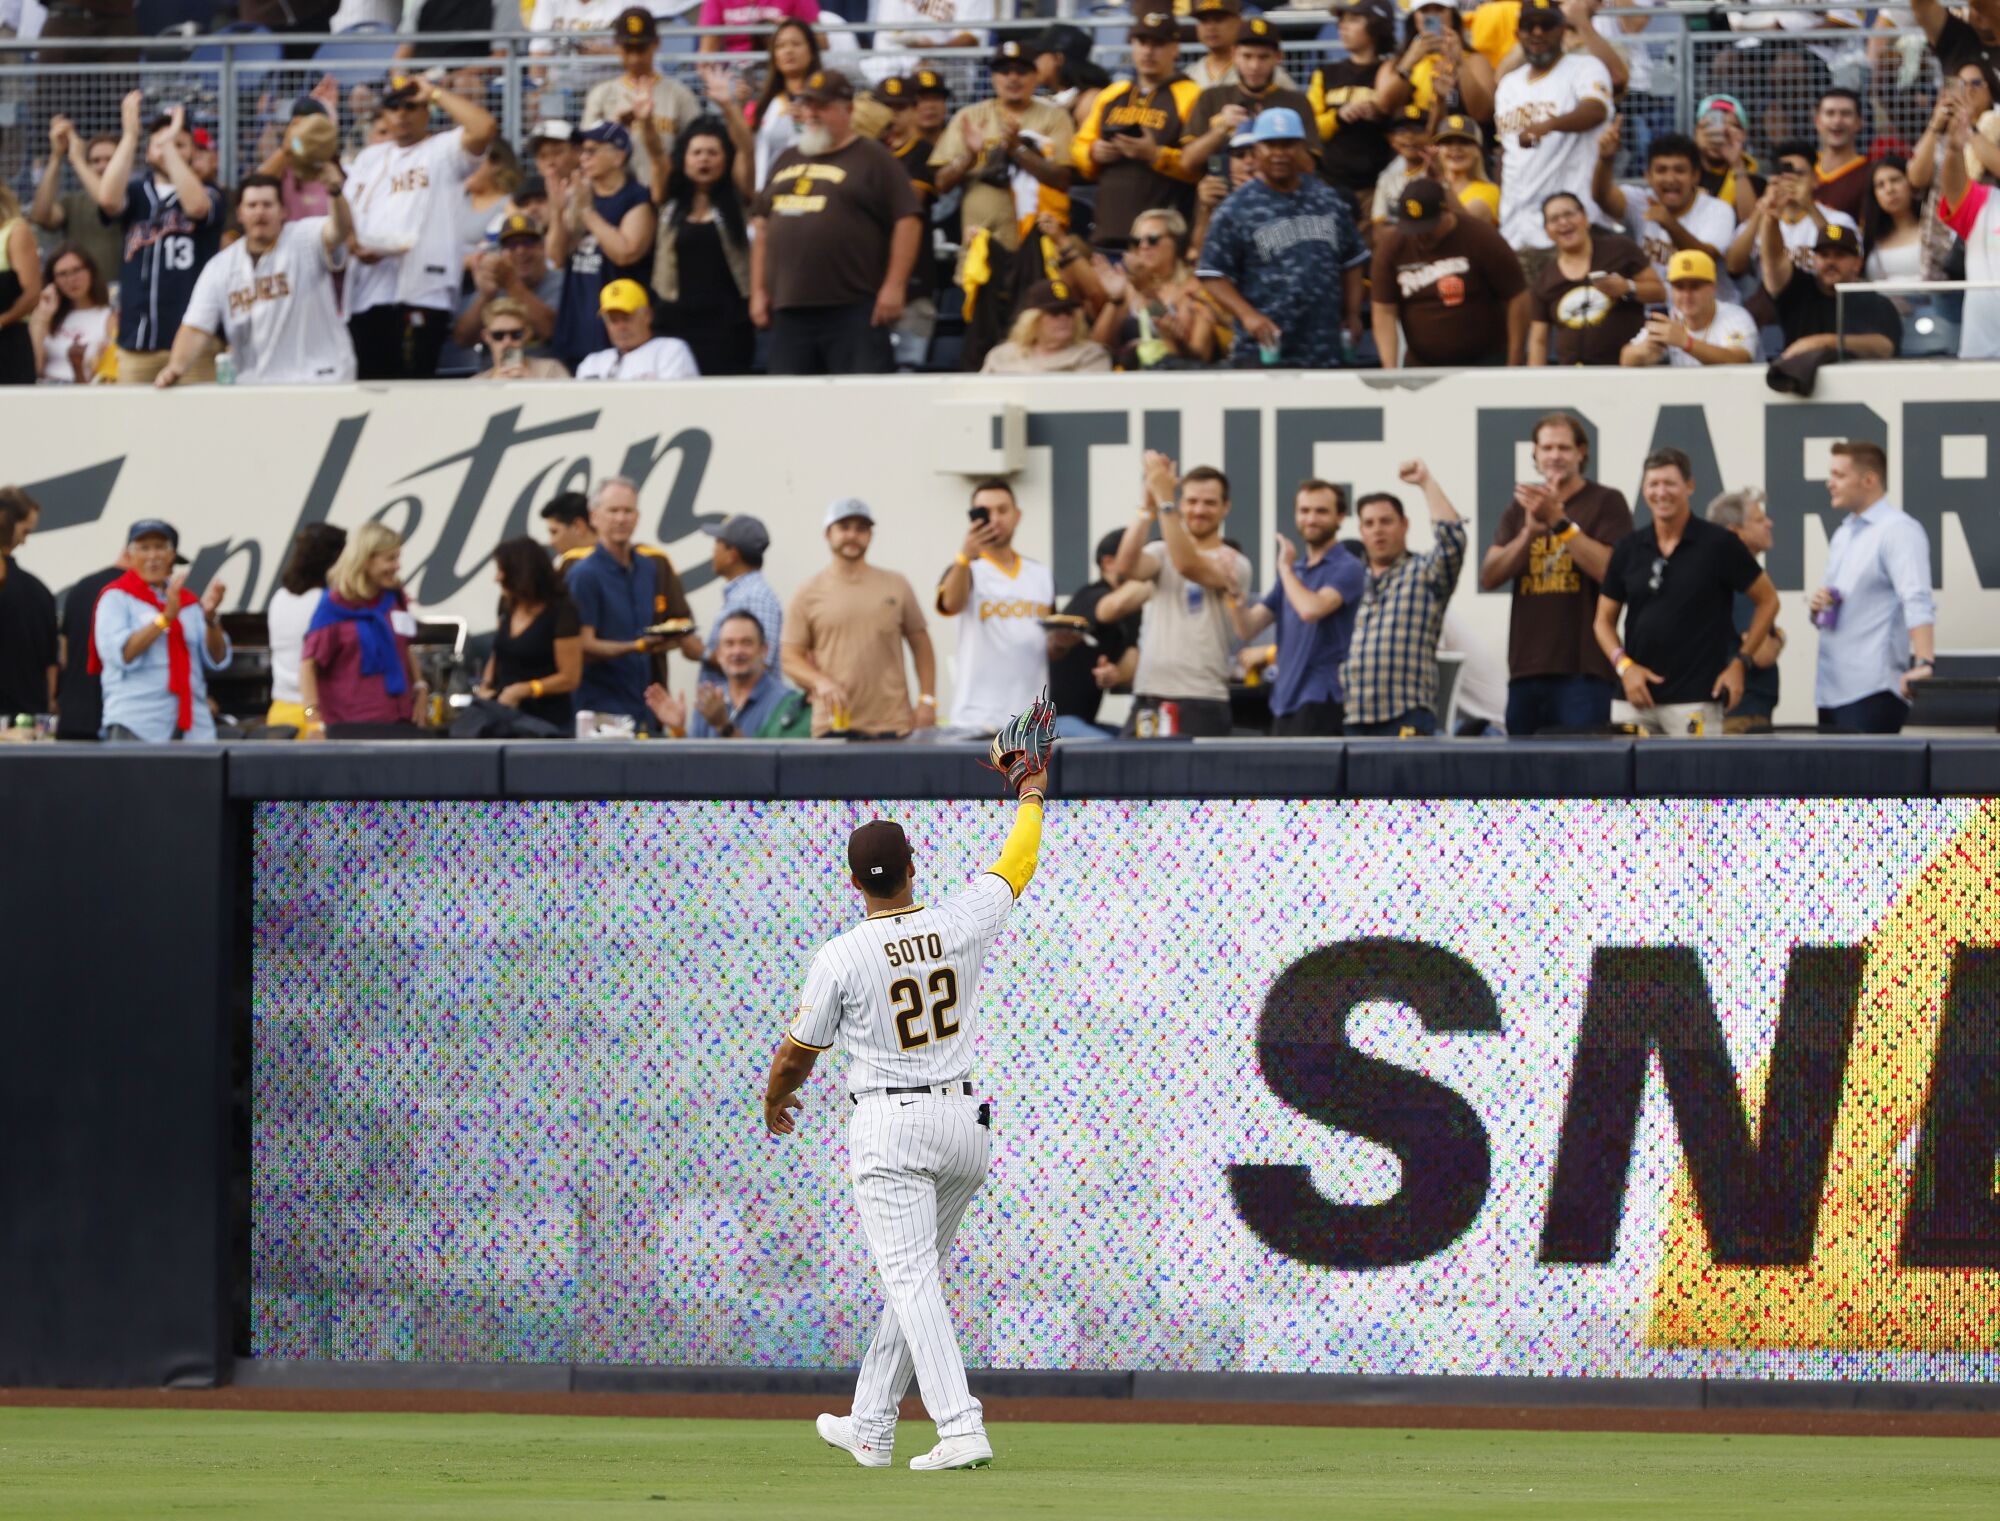 Padres right fielder Juan Soto waves to the crowd at the start of a game against the Rockies at Petco Park on Wednesday.